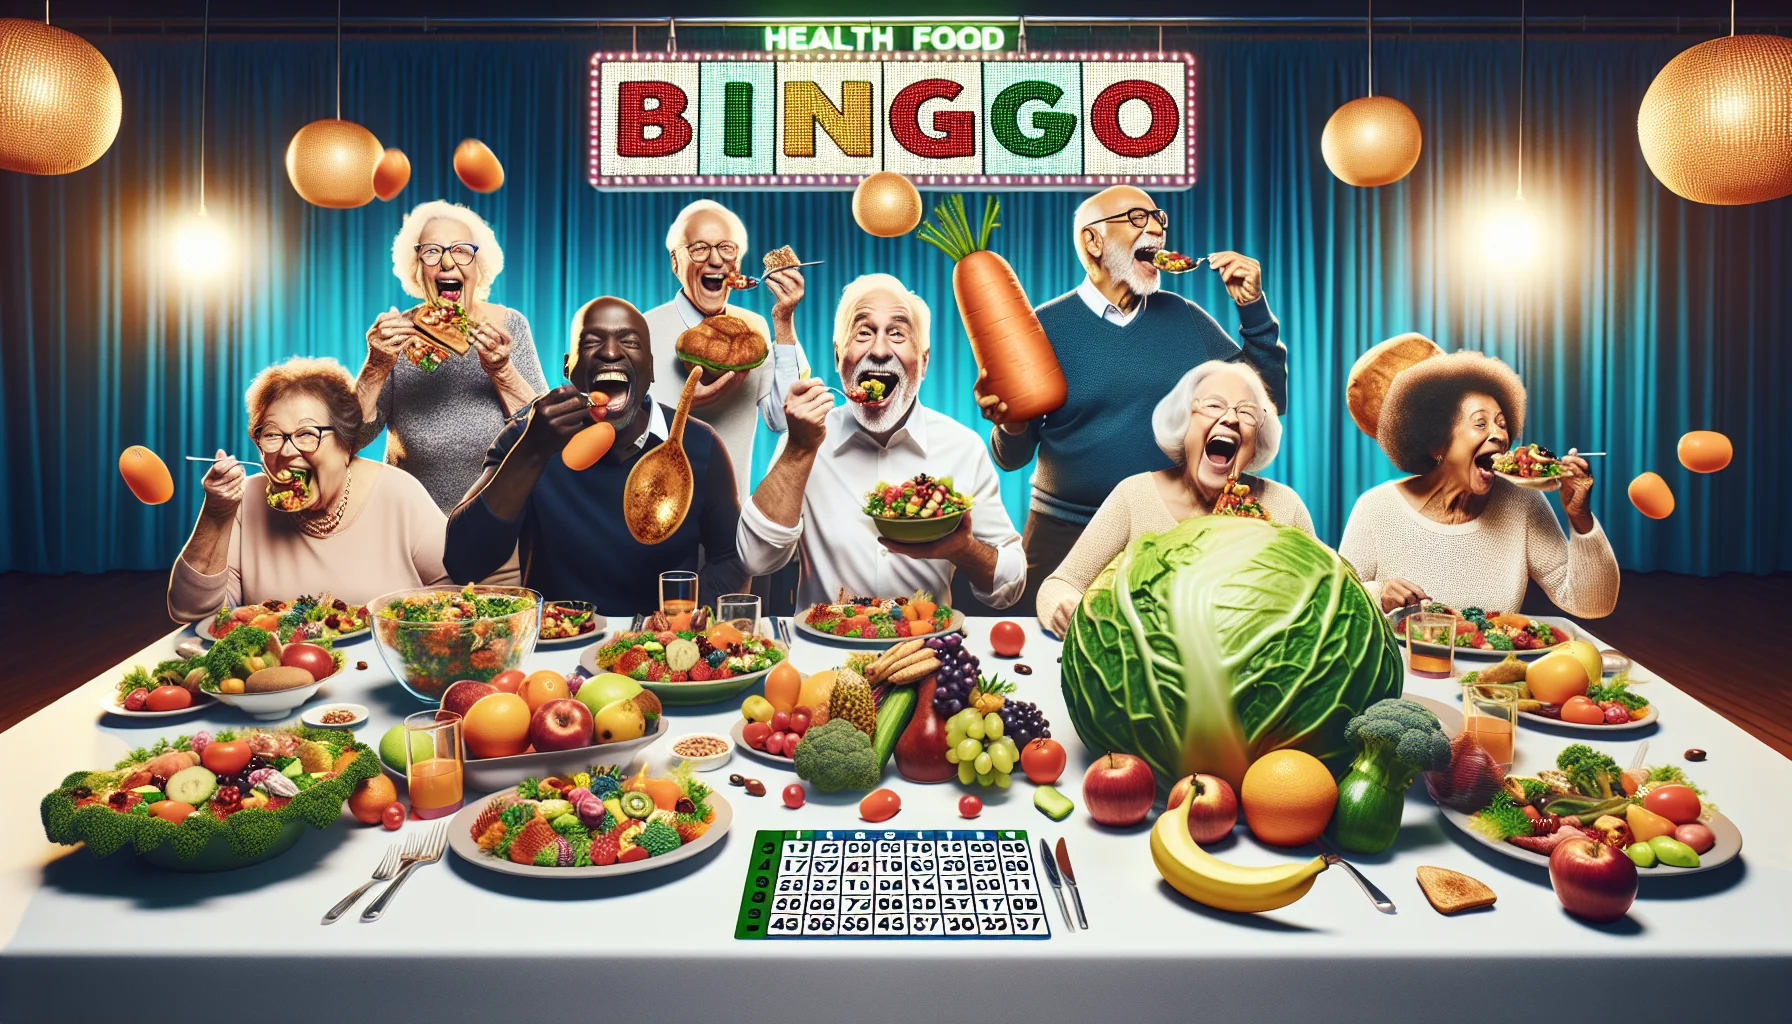 Create an amusingly realistic scene situated in a brightly lit community center. The image should depict a lively multicultural bingo night. Showcase an energetic Caucasian elderly woman, an animated Black senior man, a cheerful Hispanic elderly woman, and a lively South Asian senior man all gathered around a table. They are indulging in a feast of colossal salads, oversized fruits, and massive steamed vegetables, which are larger than their bingo cards. The winning bingo card is forgotten amidst the laughter, as a gigantic carrot lands on it, indicating the hilariously ironic health food bingo!